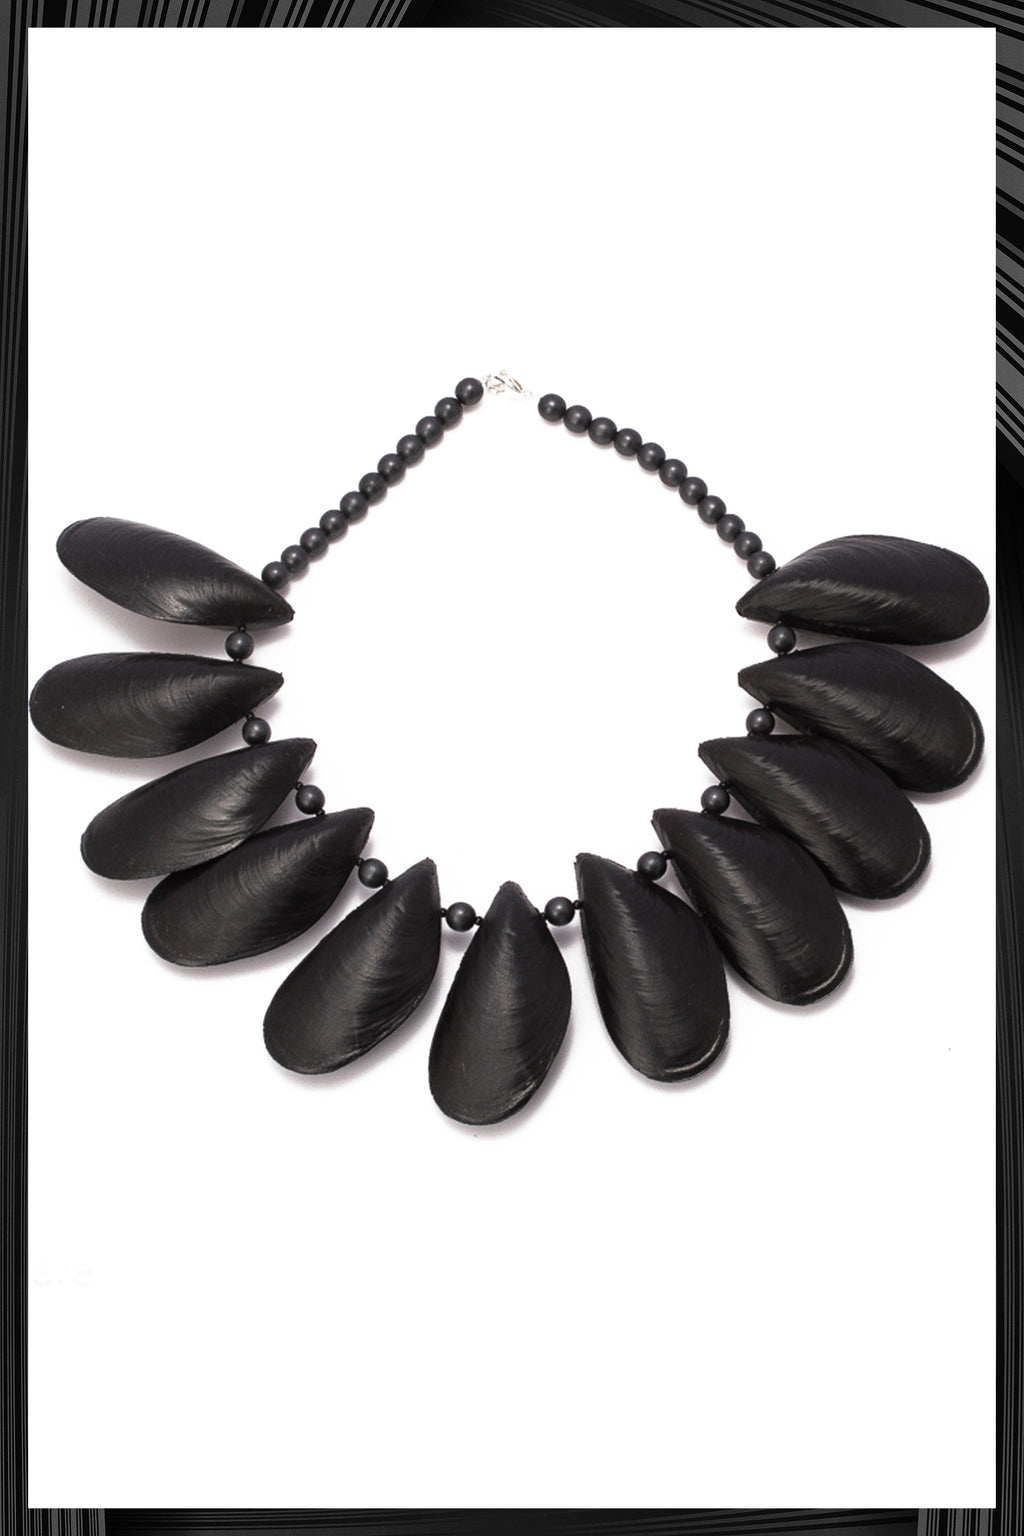 Mussel Necklace | Free Delivery - Quick Shipping